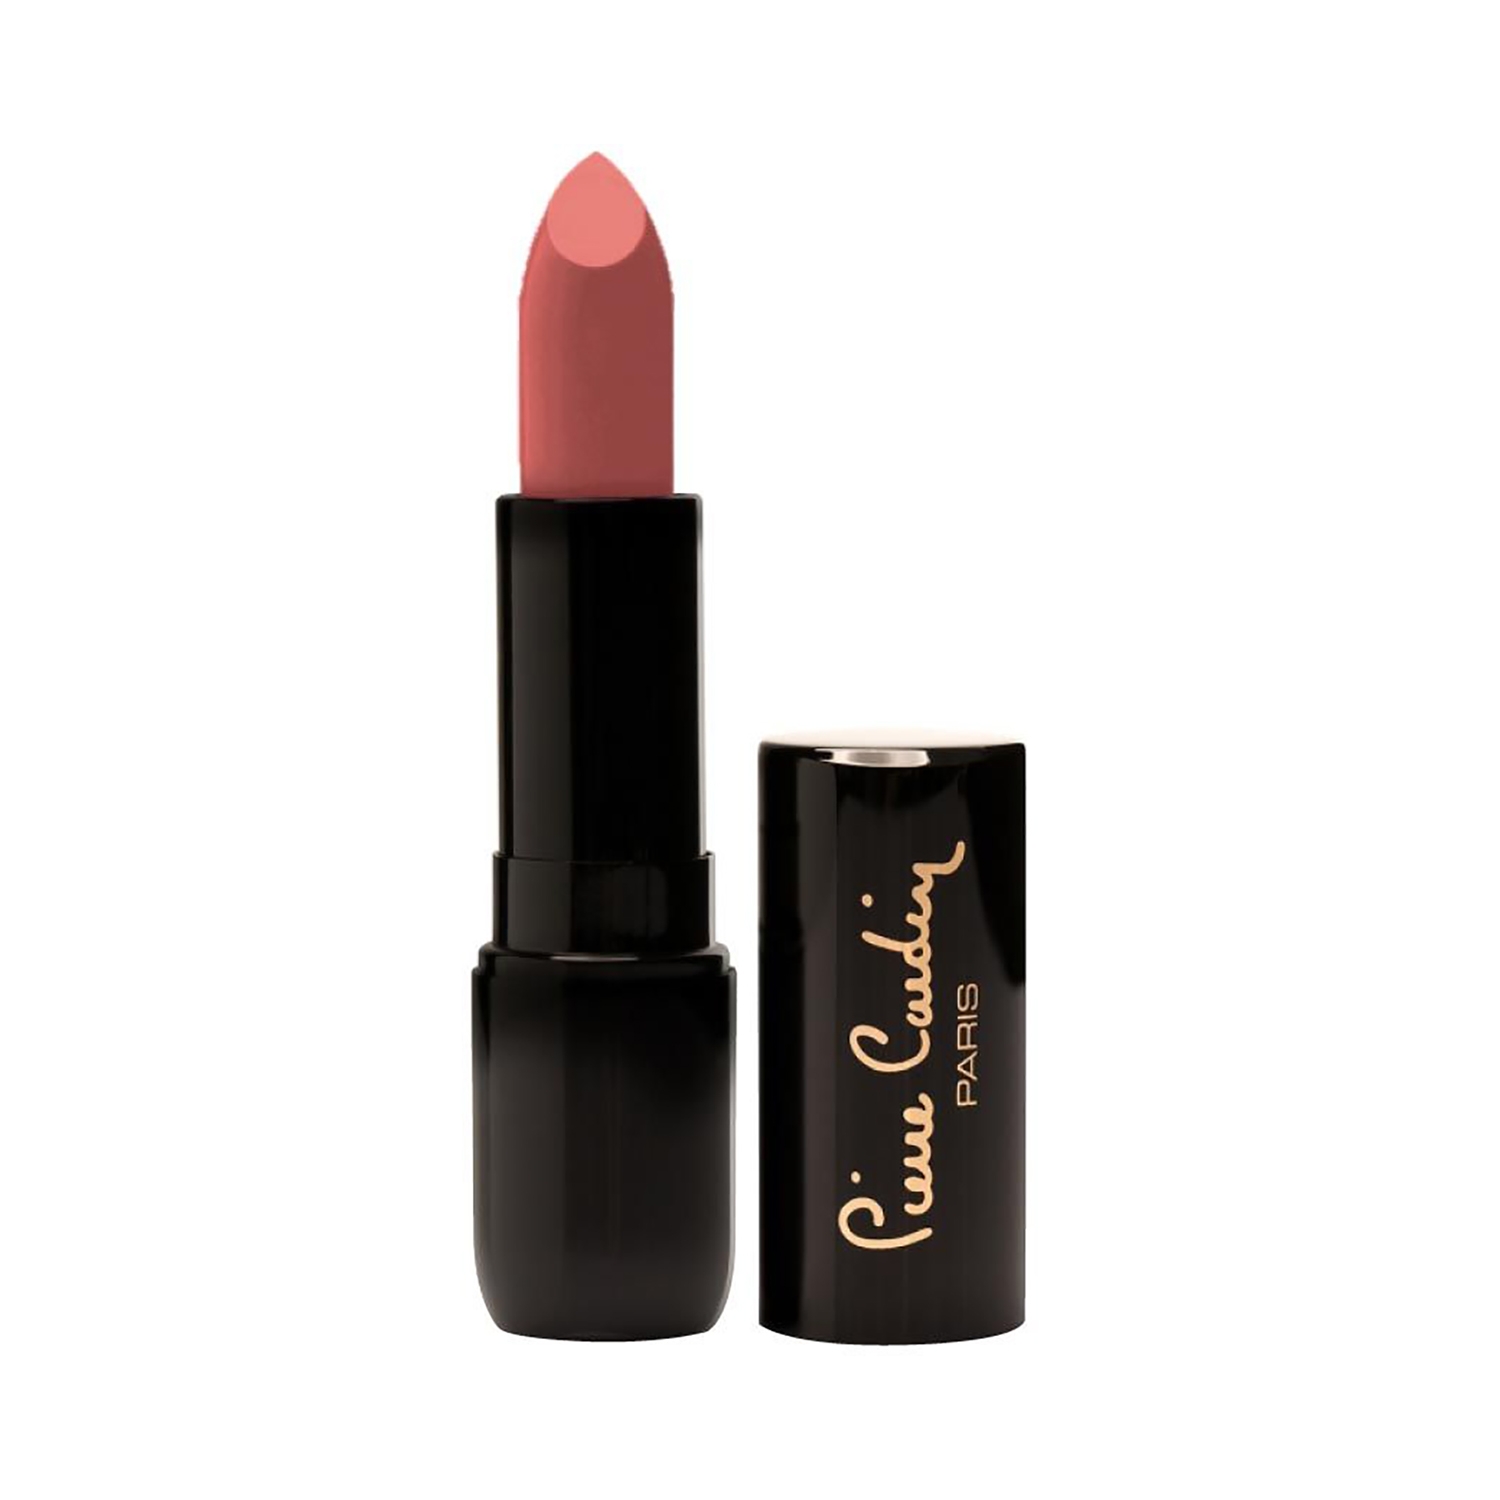 Pierre Cardin Paris | Pierre Cardin Paris Porcelain Edition Rouge Lipstick - 222 Pink Nude (4g)